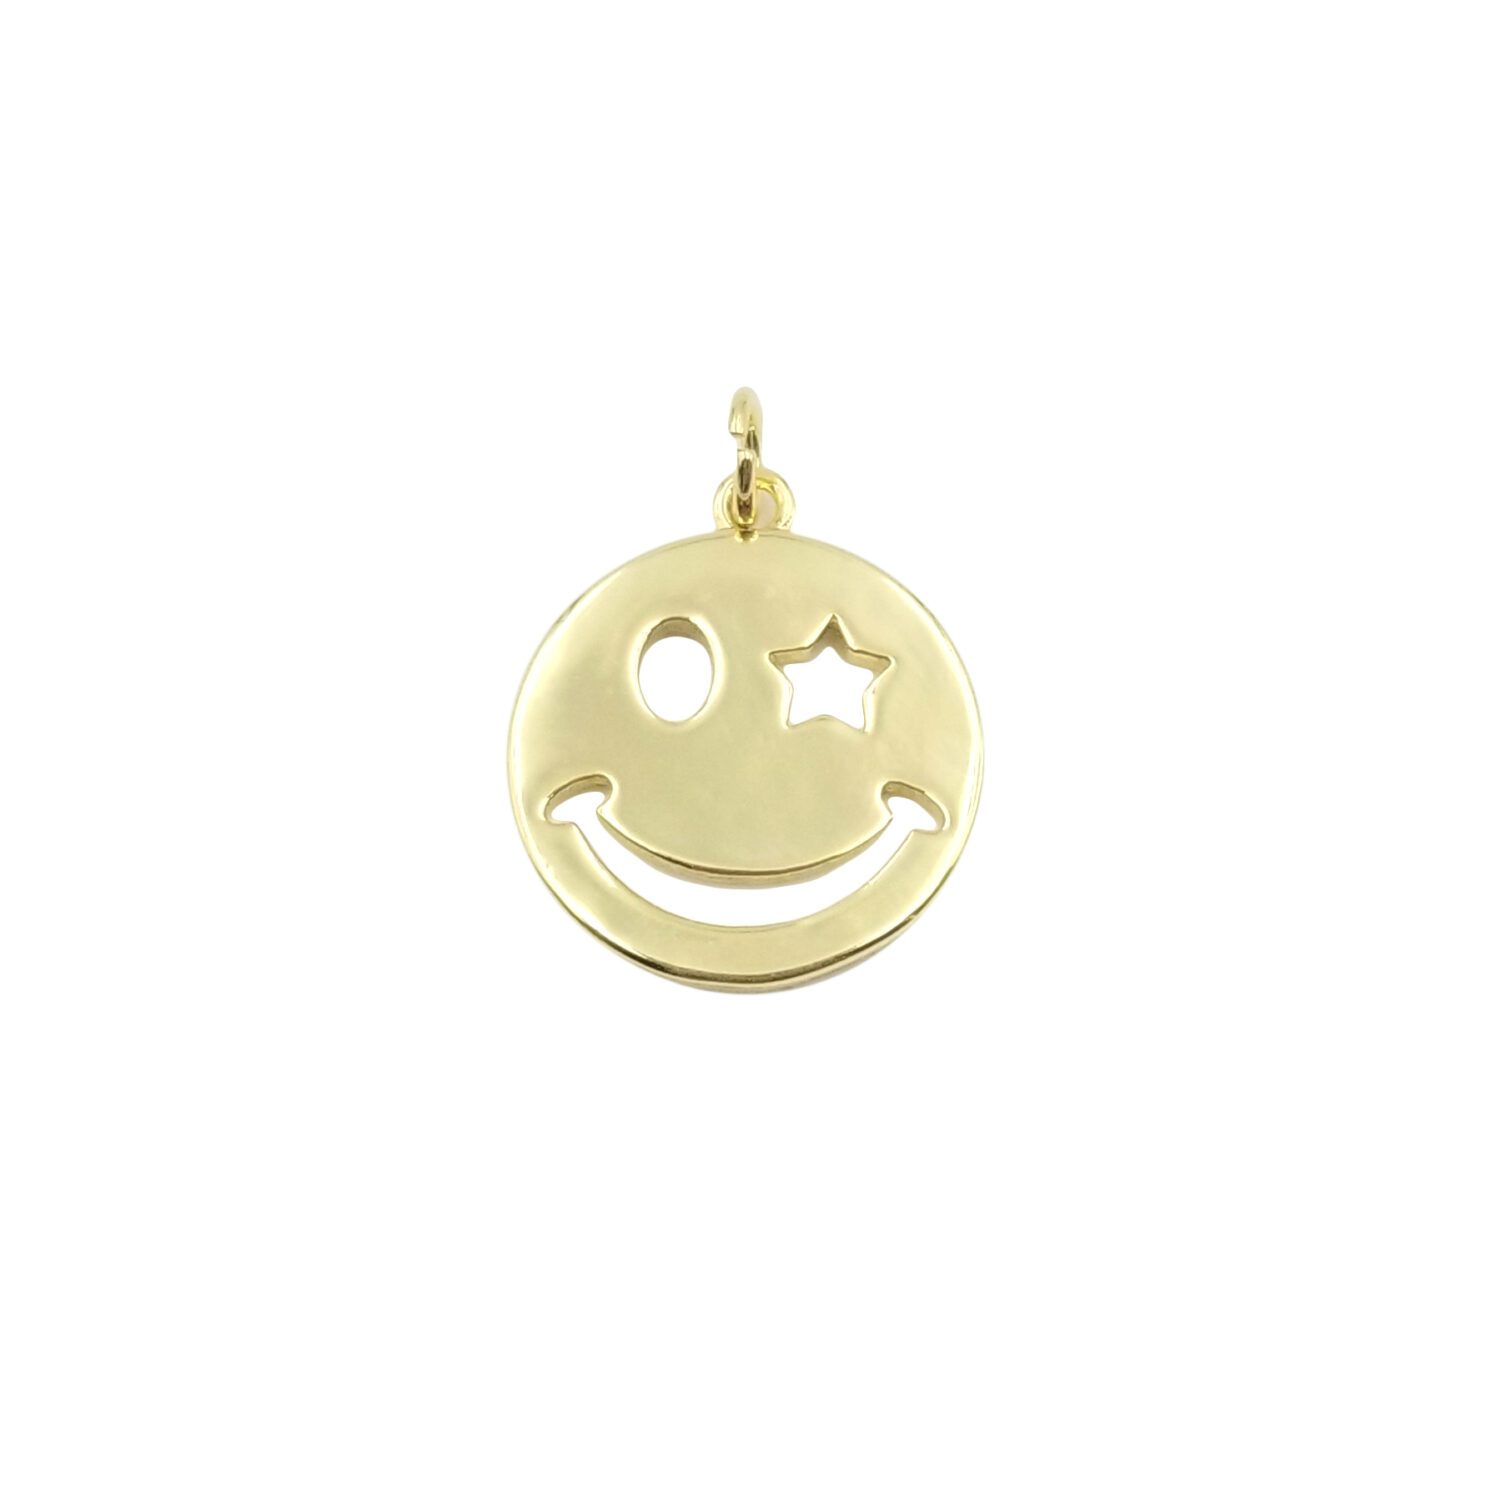 Pastel Smiley Face Beads, Emoji Charm, Happy Face Charm, Pendant